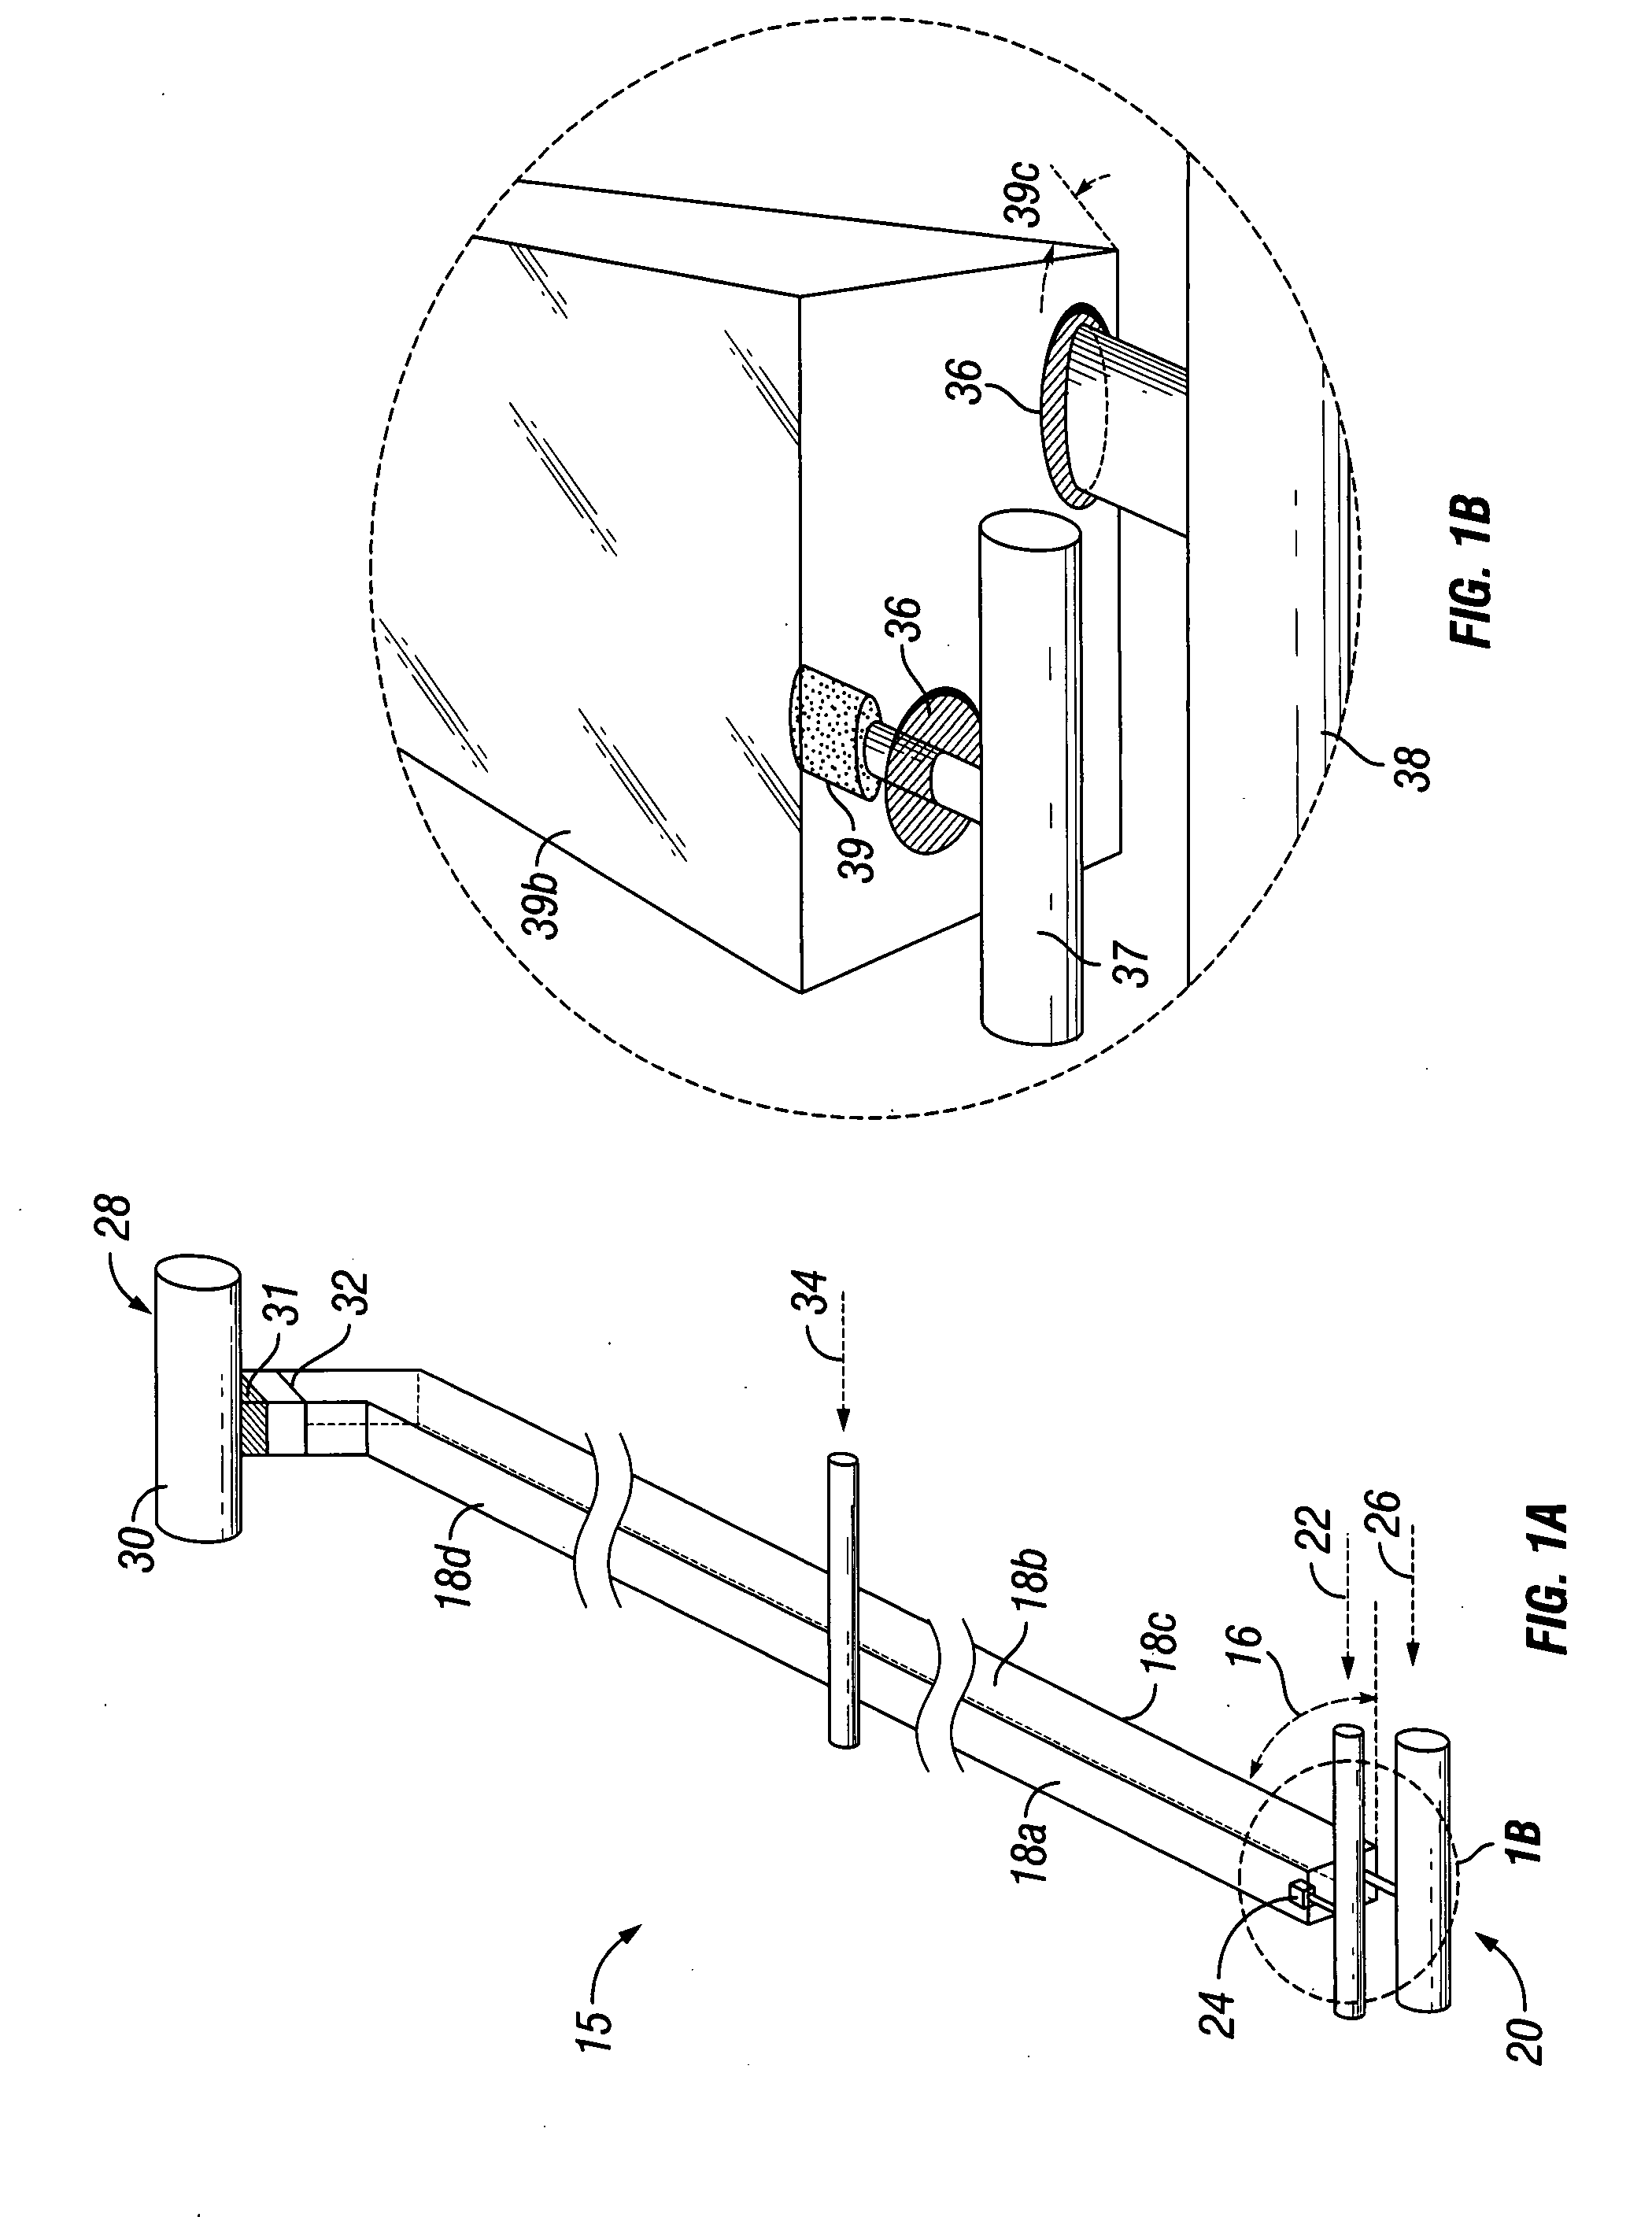 Large-scale photo-bioreactor using flexible materials, large bubble generator, and unfurling site set up method